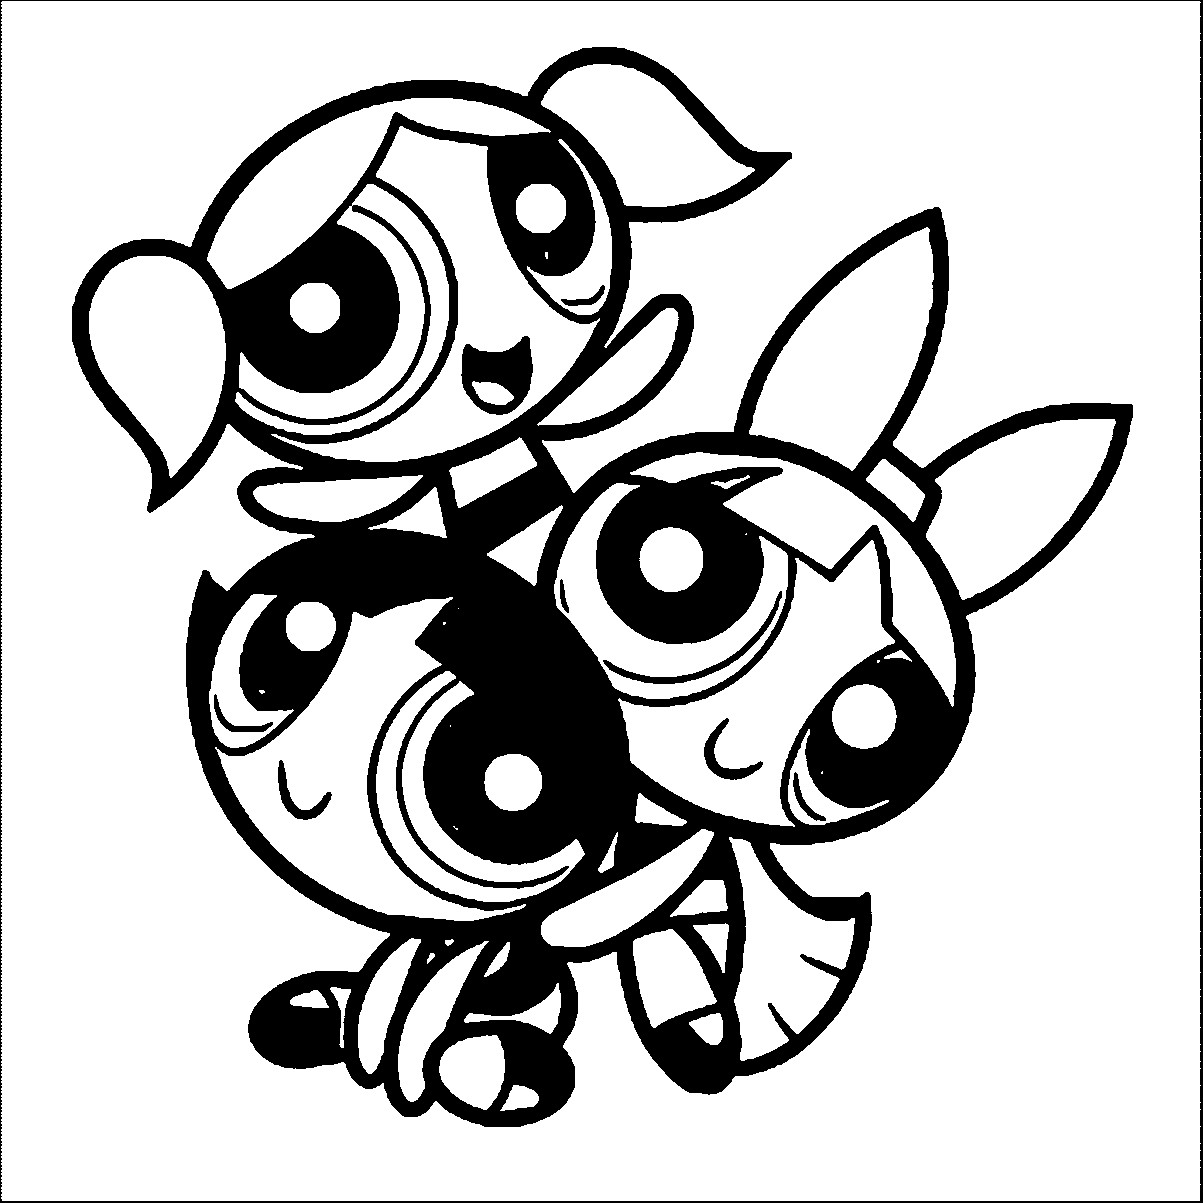 Power Puff Girls Coloring Pages
 Powerpuff Girls Coloring Pages